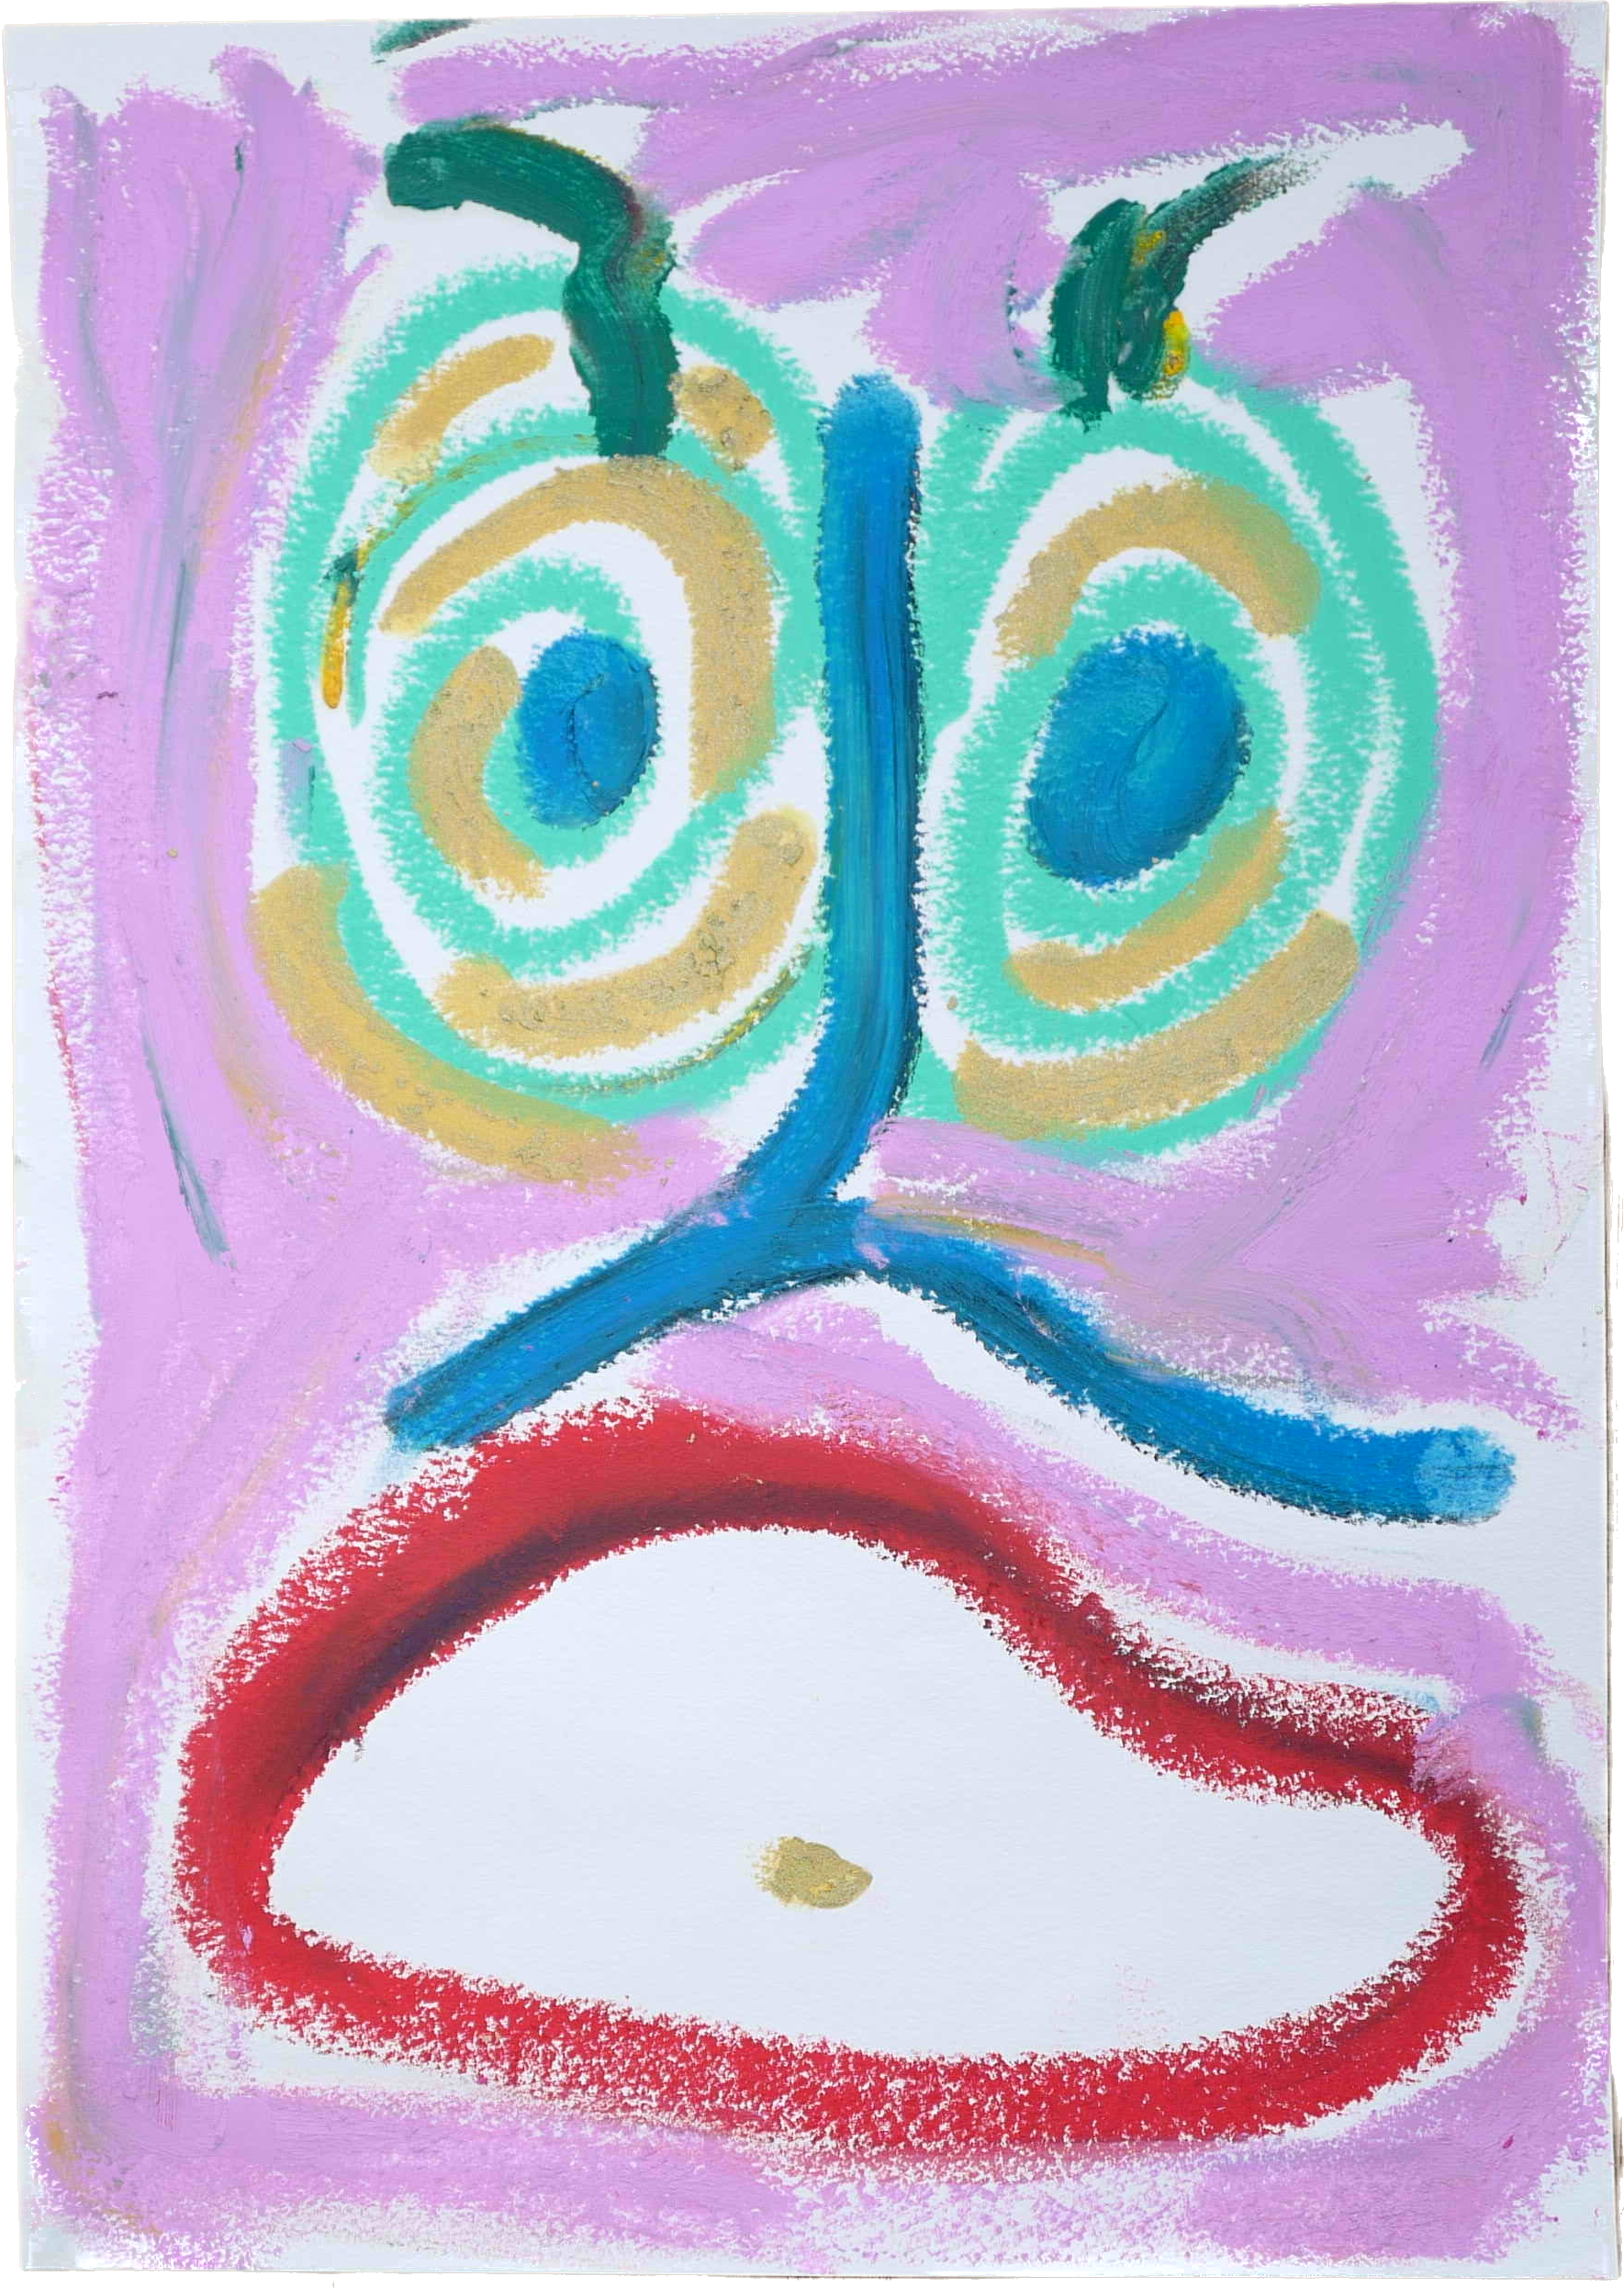 Lenfantvivant abstract pastel face painting" "Whimsical abstract art reminiscent of Klee" "Dubuffet's art brut influence in modern art" "Contemporary art brut facial abstraction" "Sauna Fusion series artwork by Lenfantvivant"